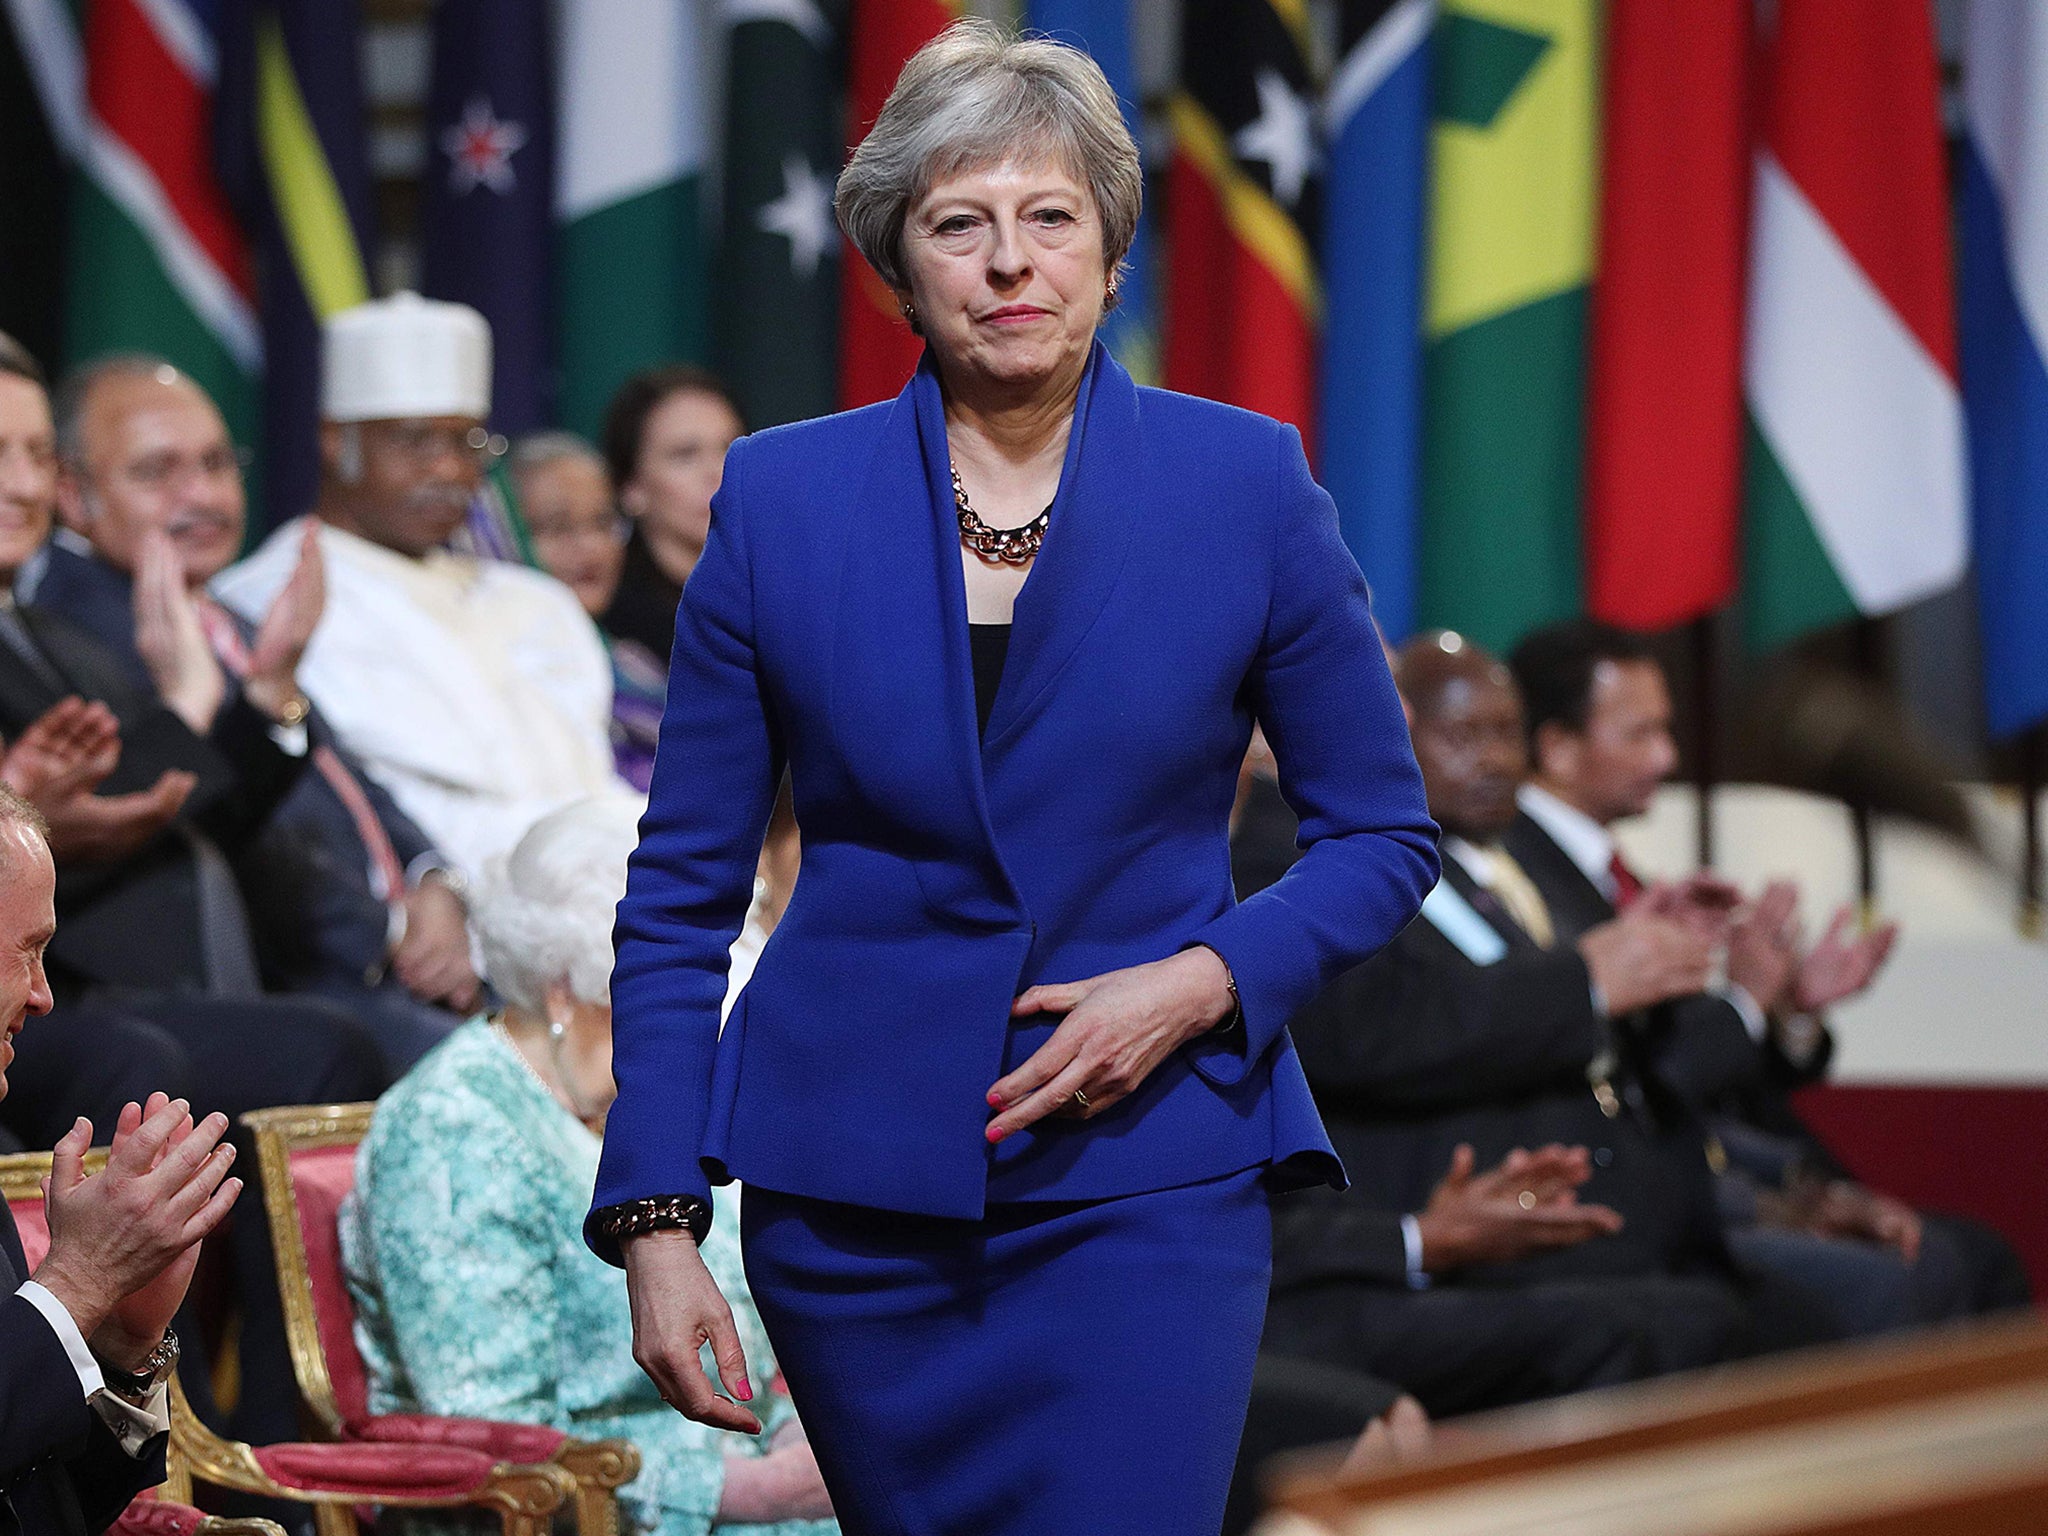 As we have seen so often in recent years, desperate migrants fleeing civil war or persecution are not deterred by Ms May’s bureaucratic obstacles